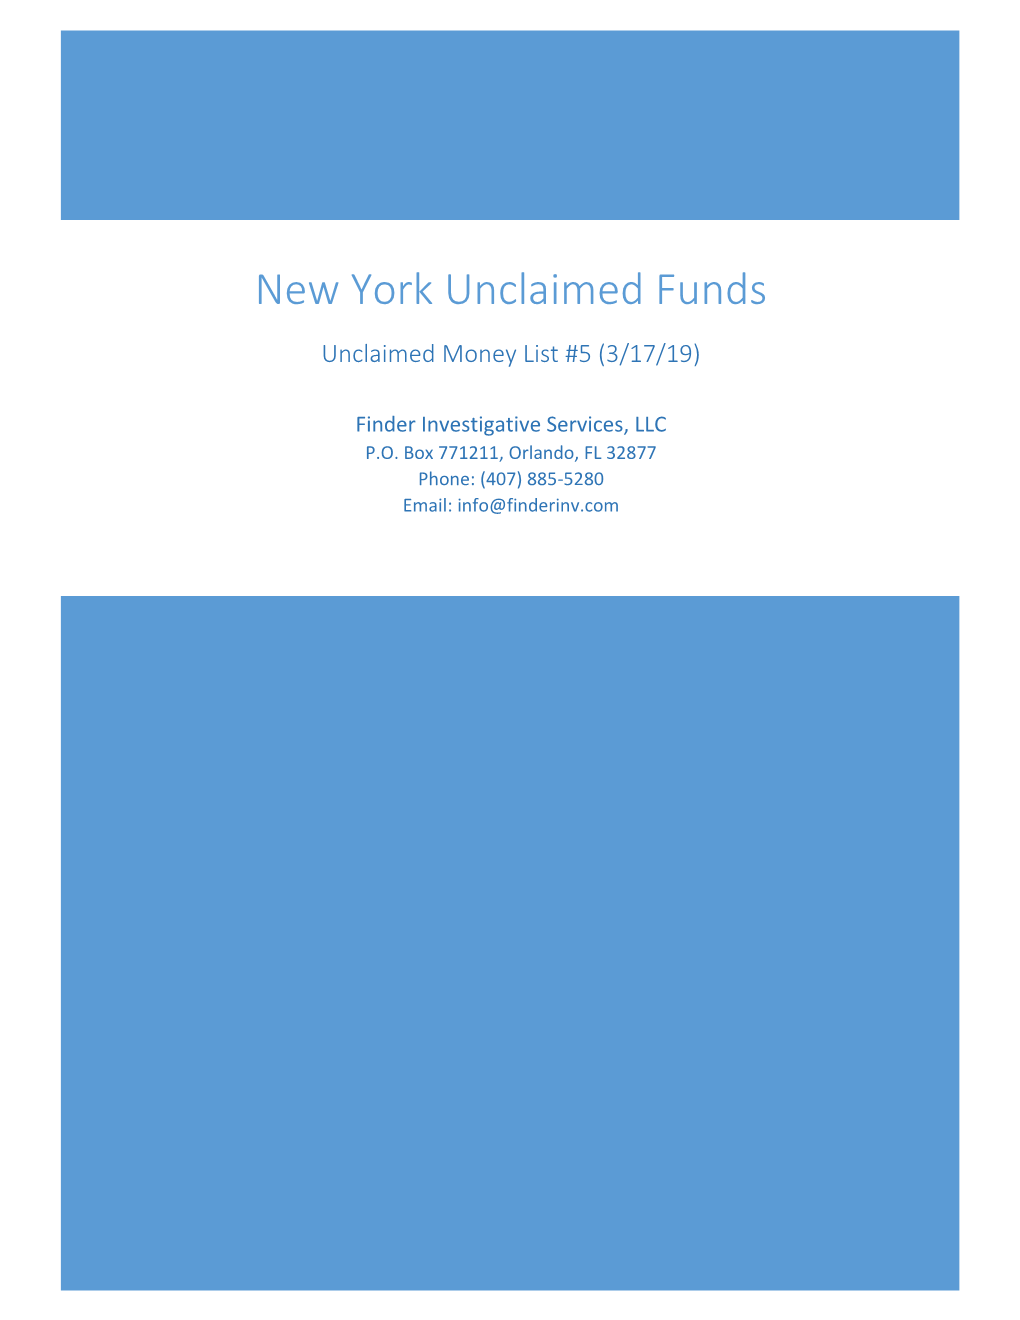 New York Unclaimed Funds Unclaimed Money List #5 (3/17/19)